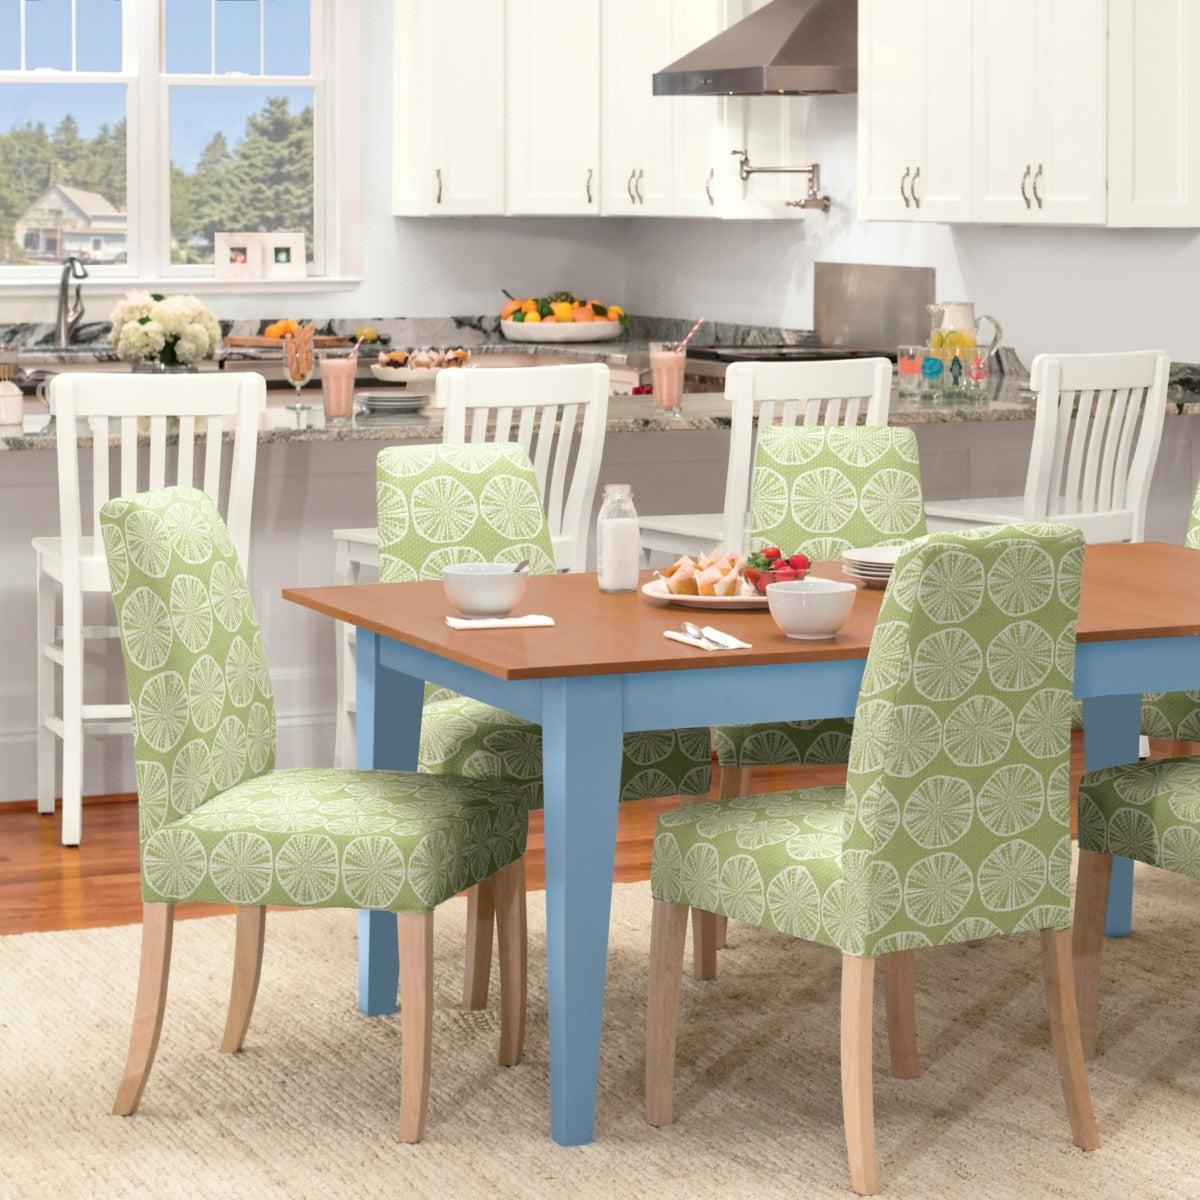 Maine Cottage Cokie Bar Stool by Maine Cottage | Where Color Lives 